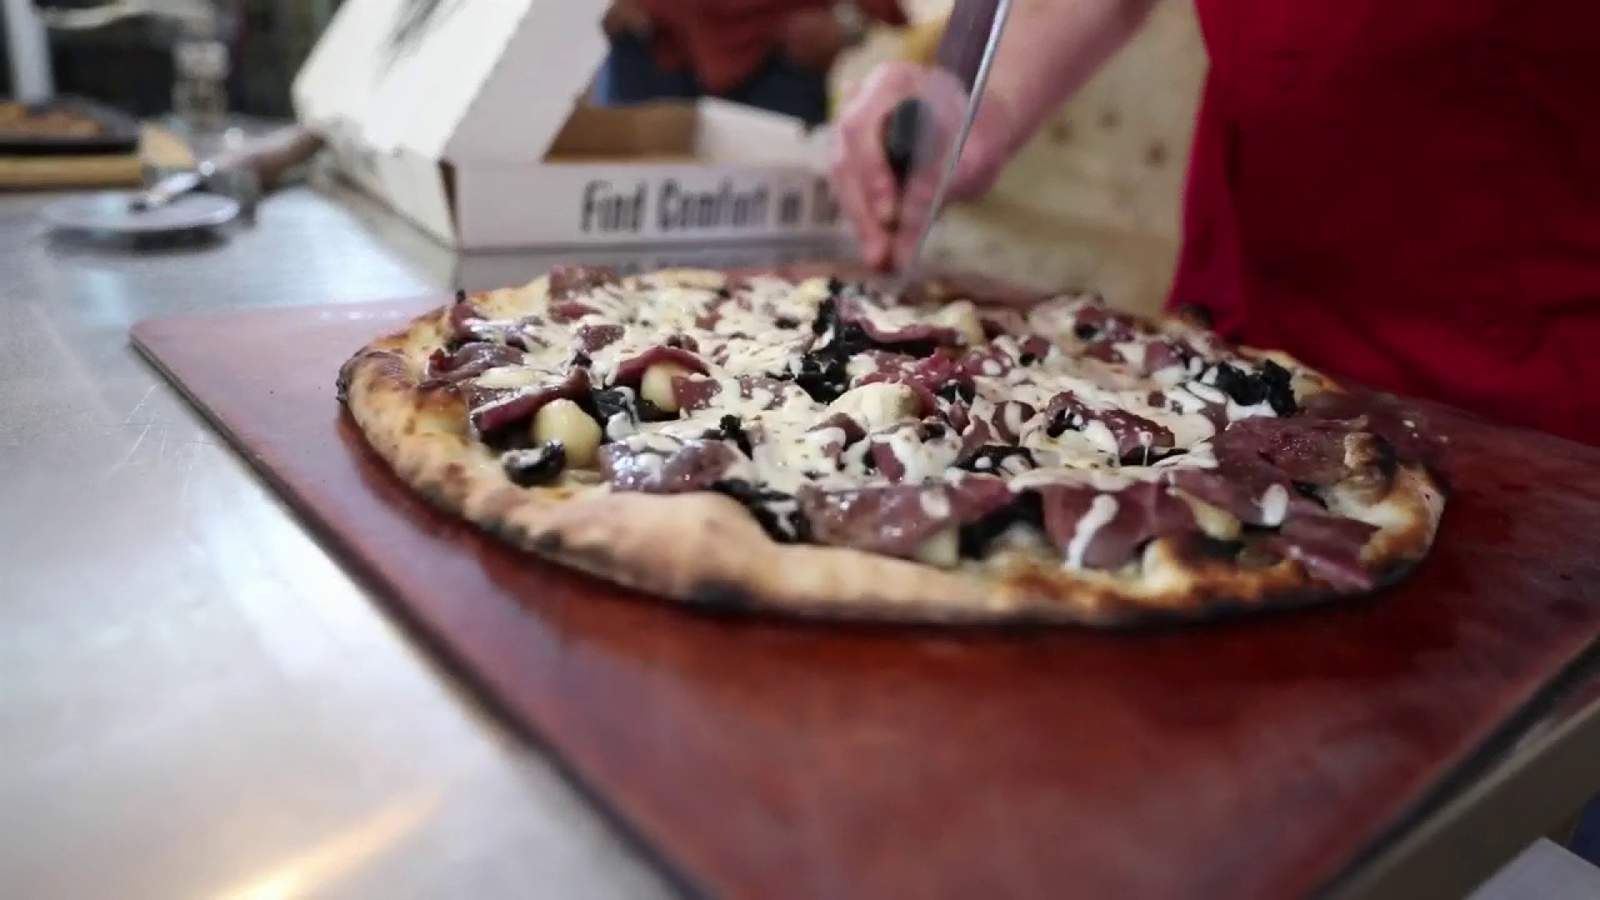 Find Comfort with pizza at this family-owned Hill Country hot spot